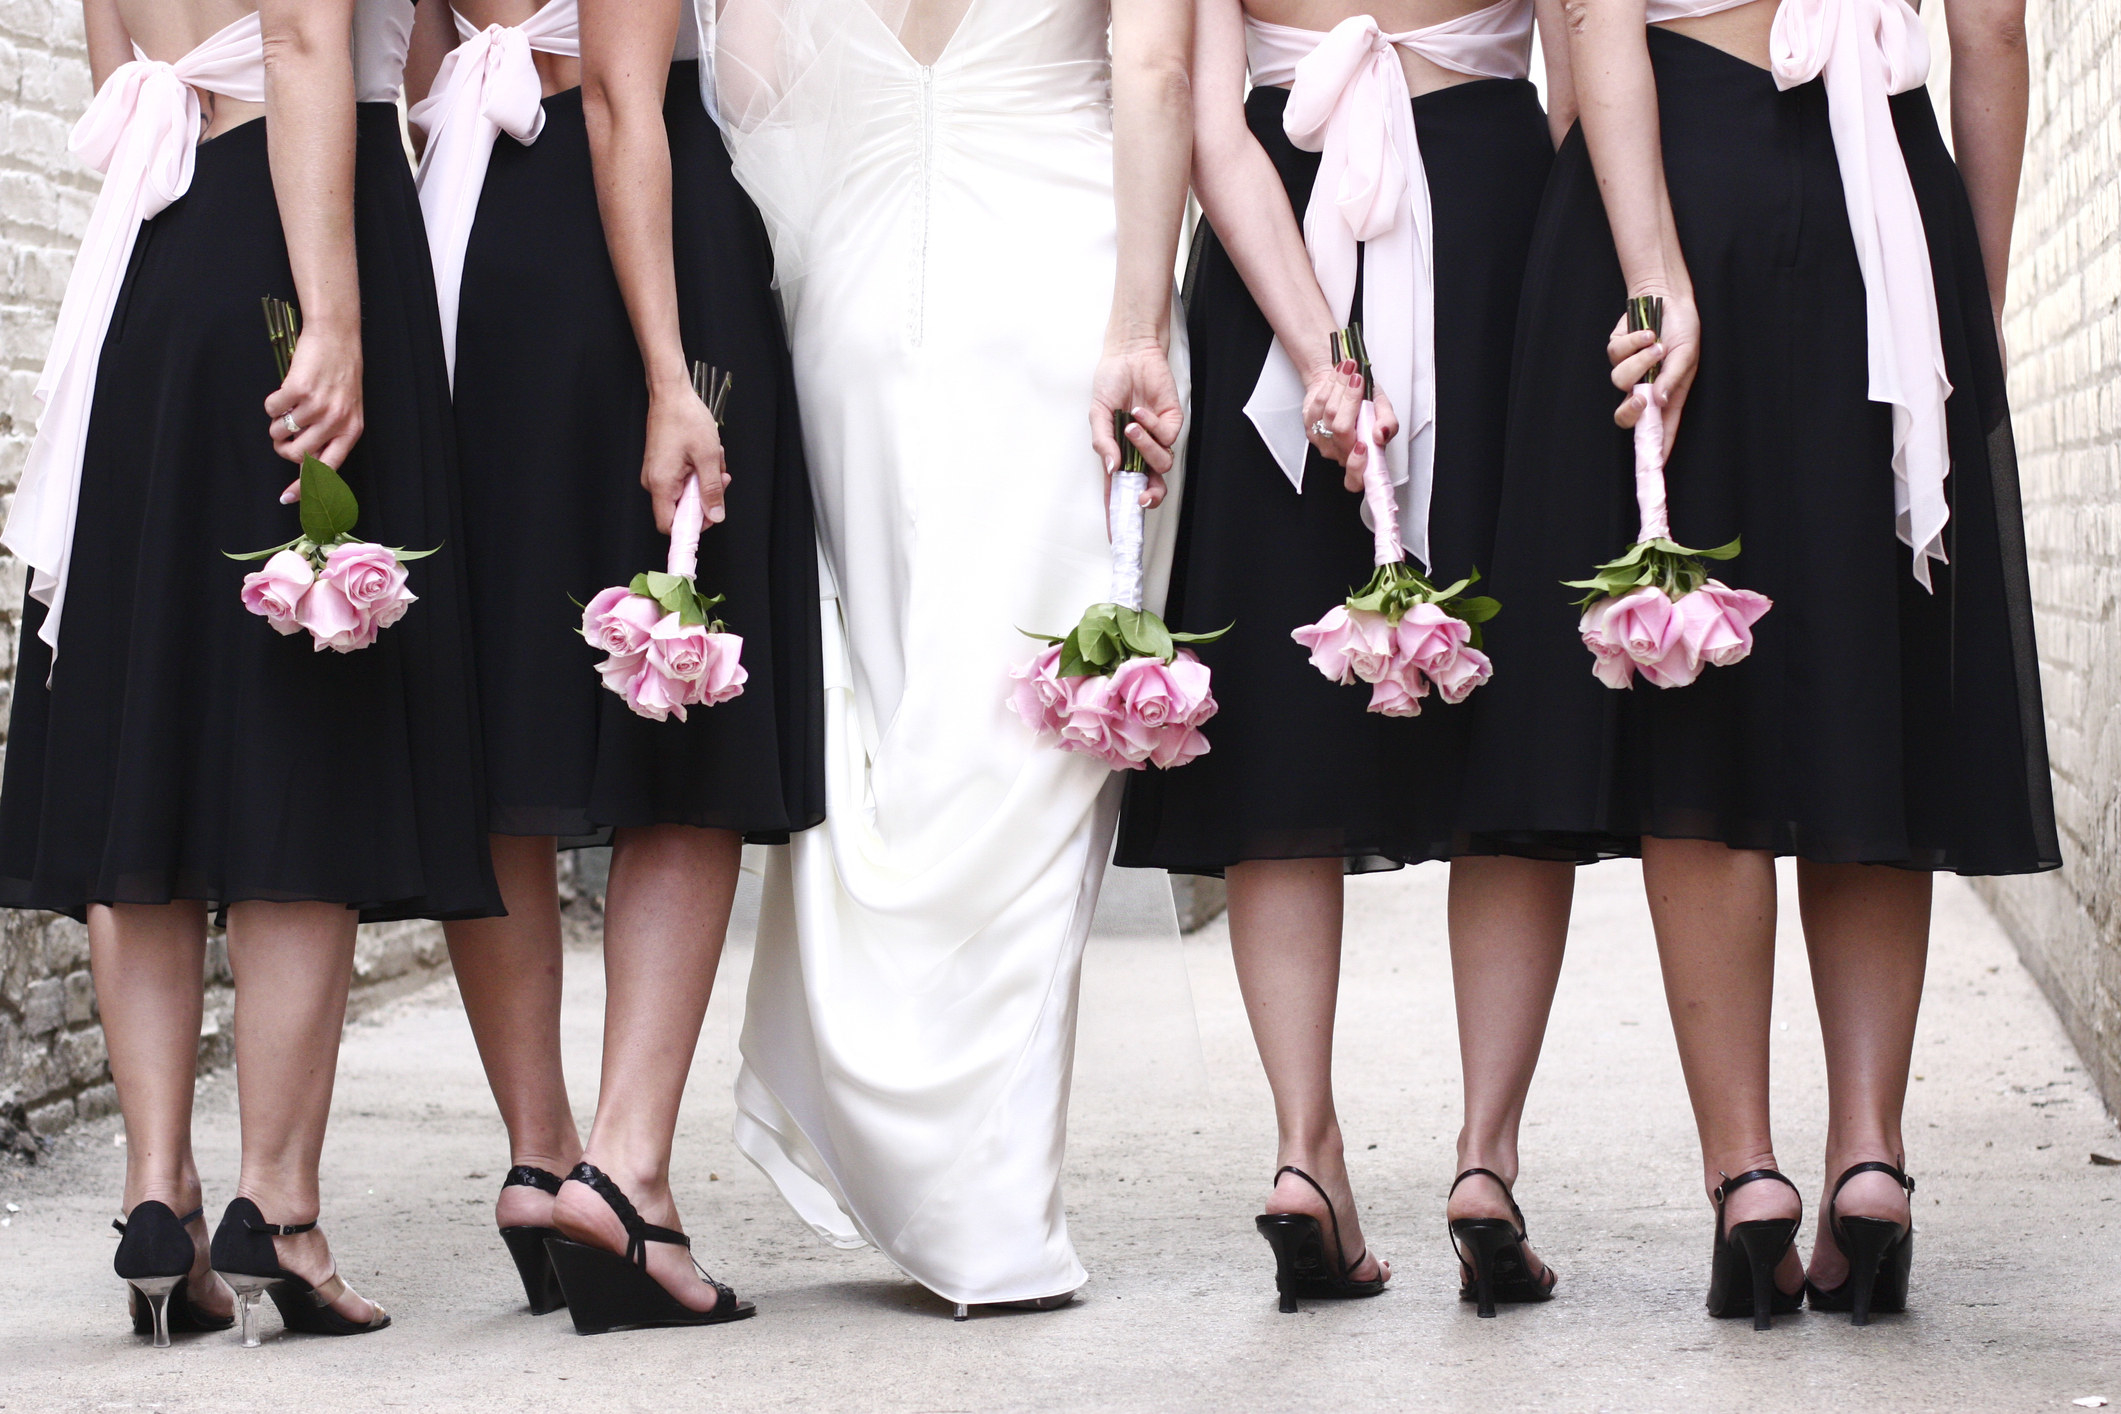 bride and bridesmaids photo from the waist down showing roses in their hands